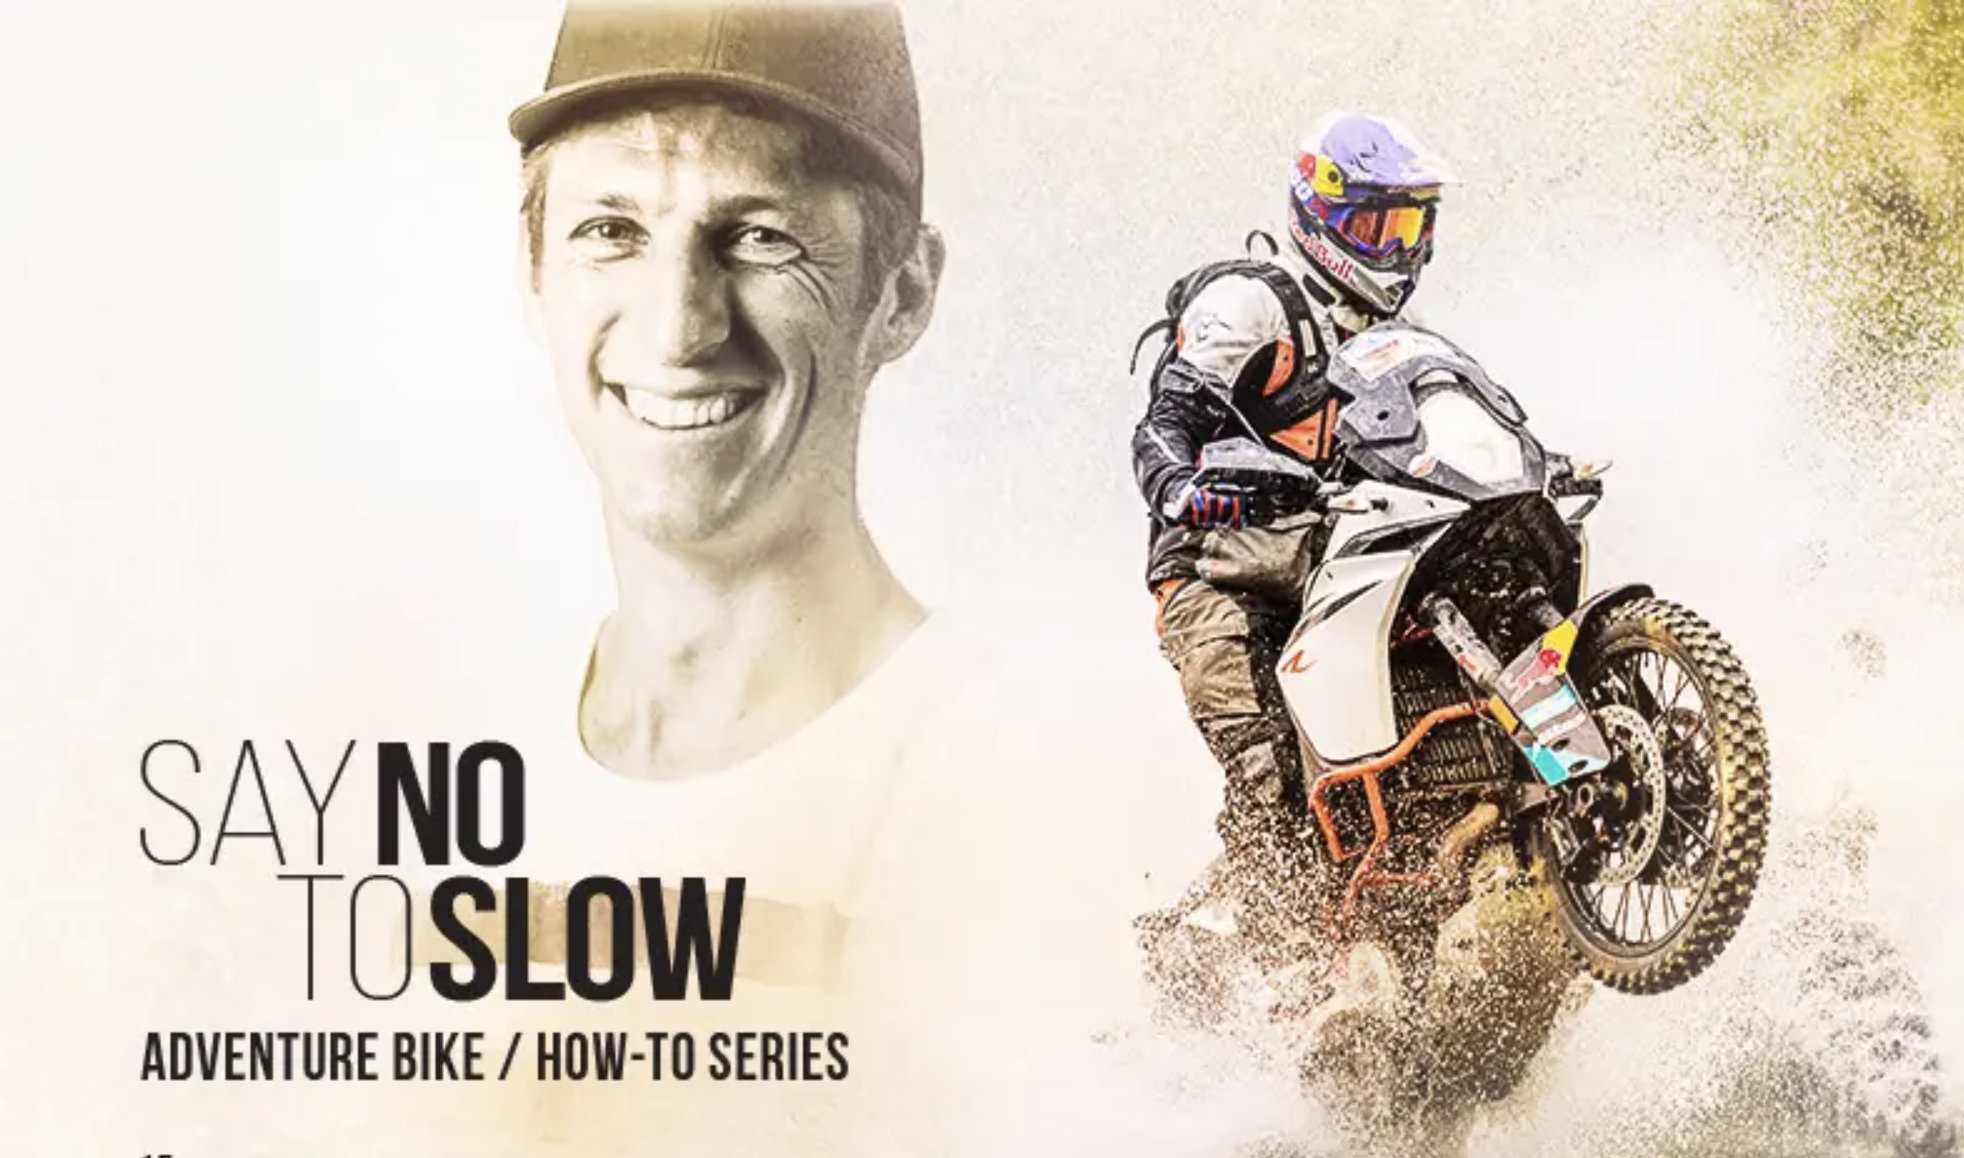 New Chris Birch ‘How To’ off road training videos